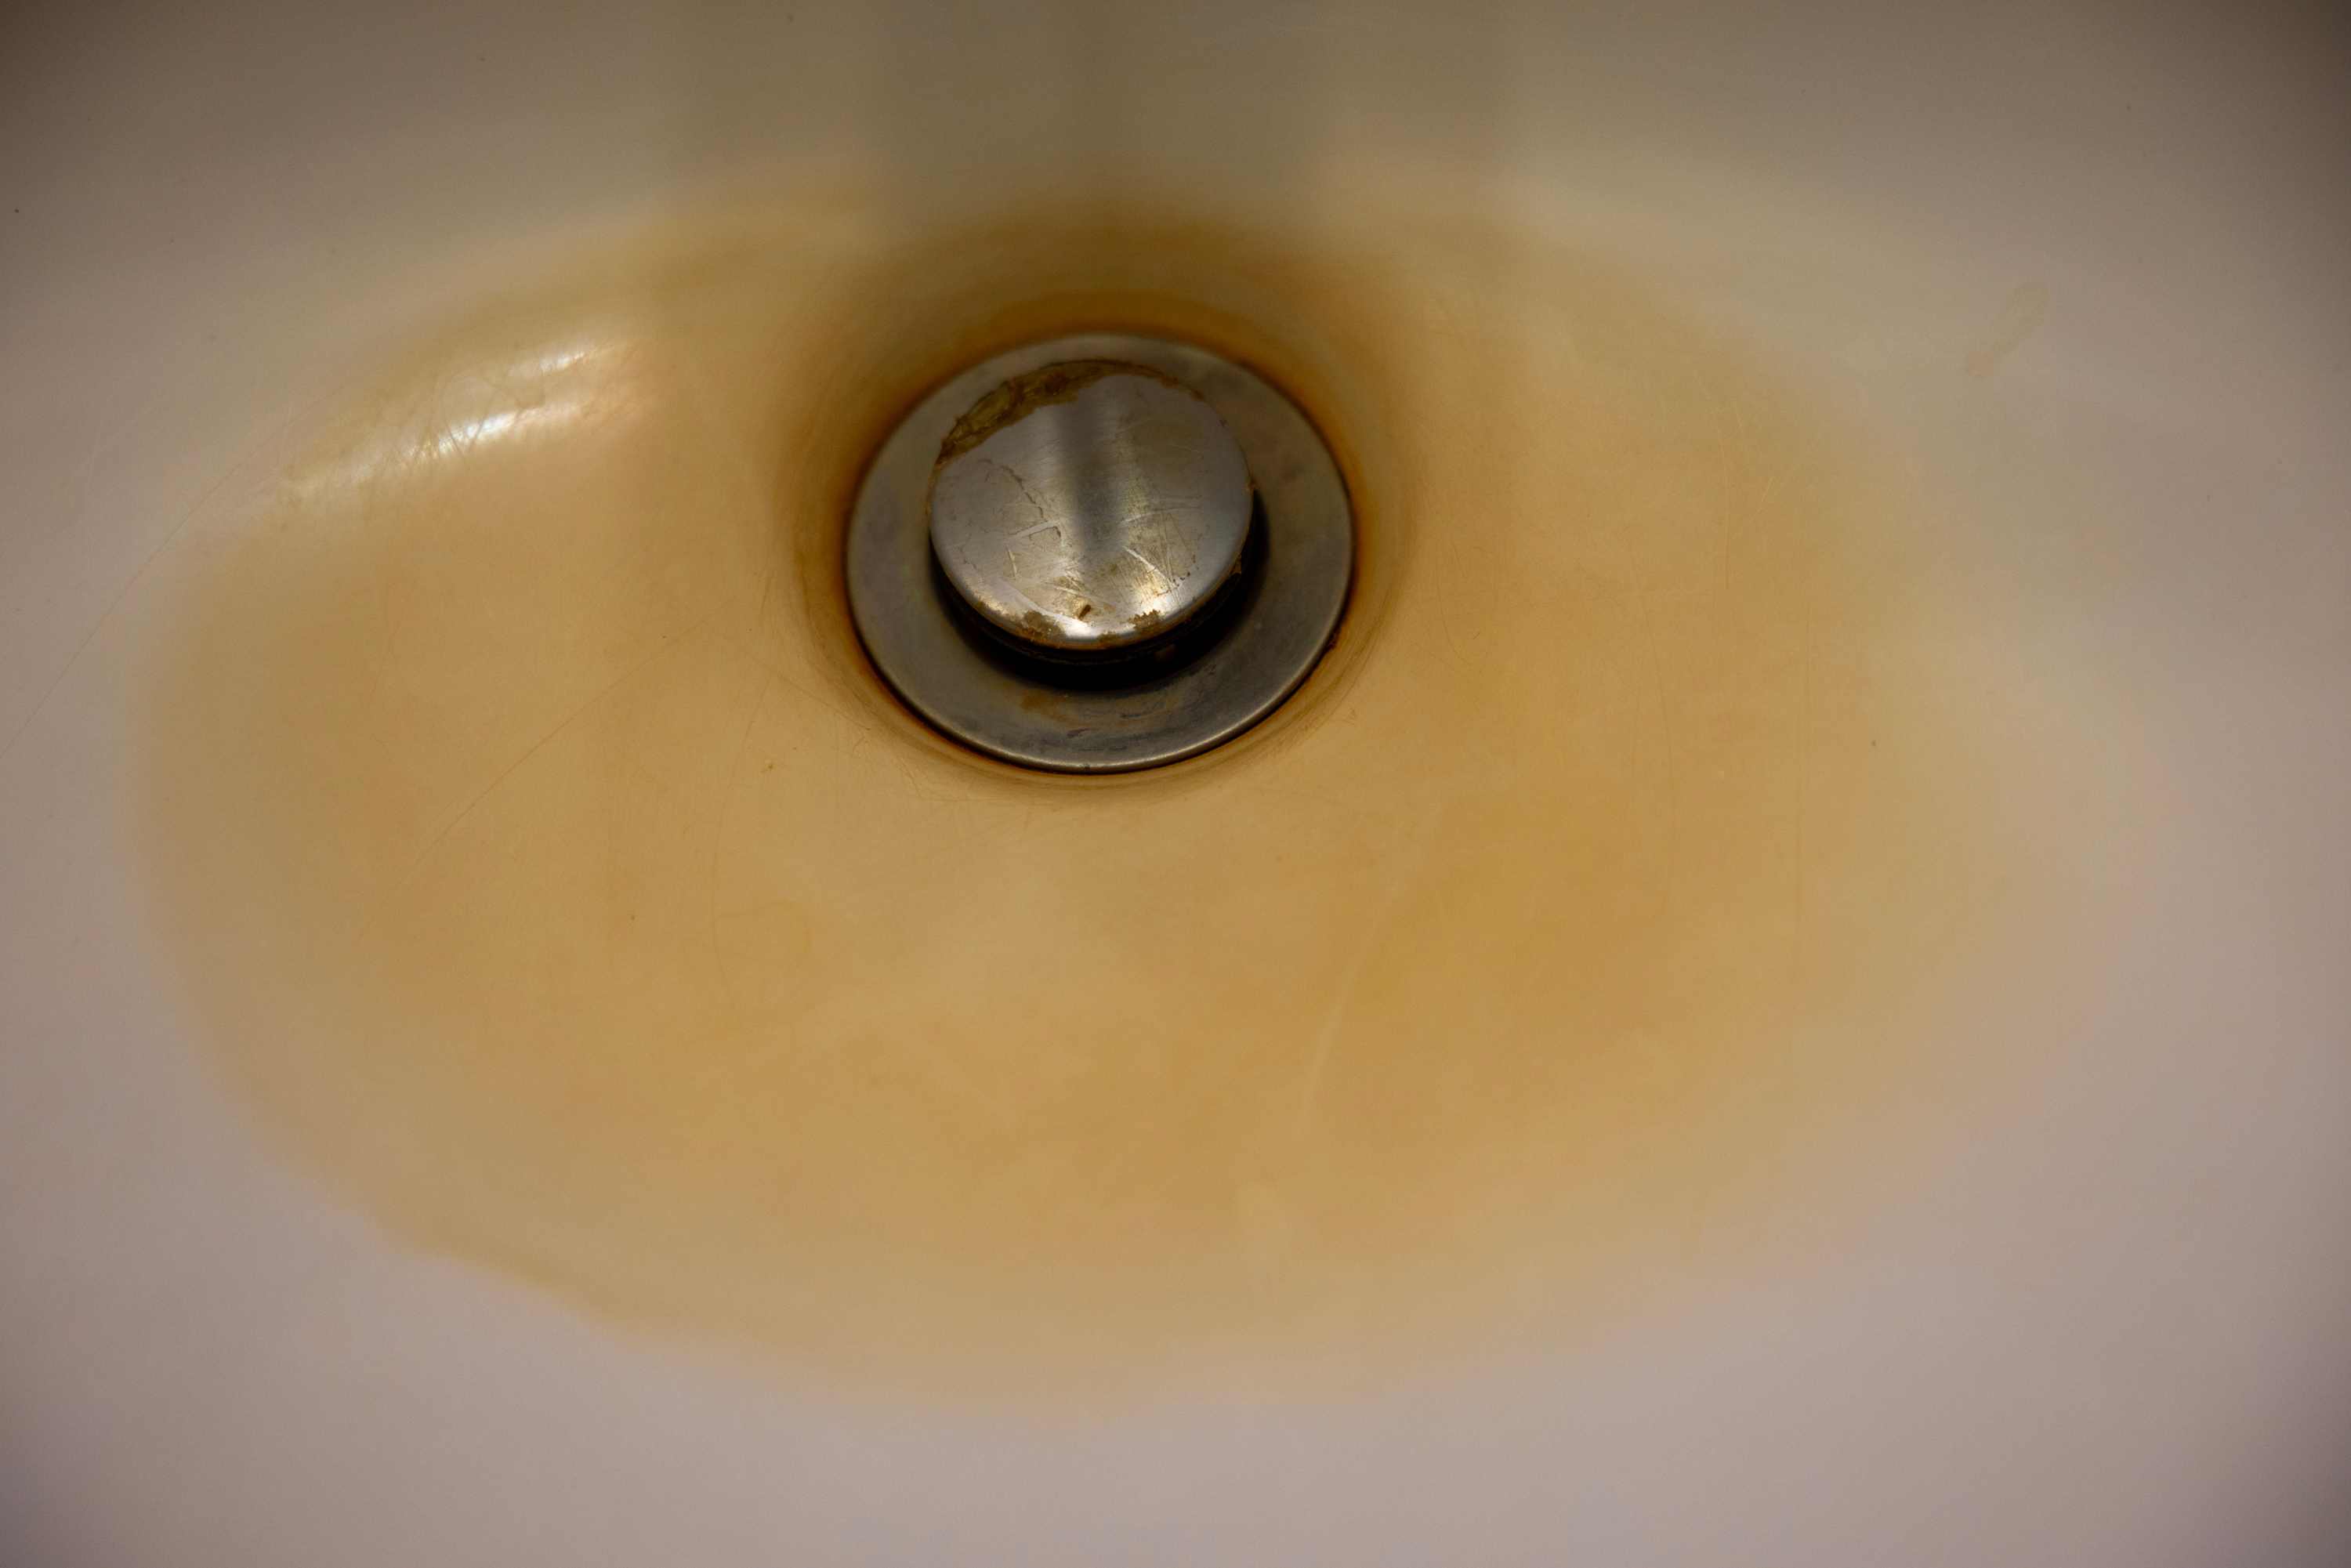 Carlton Sylvester’s sink is discolored due to sand buildup from his home’s water well system